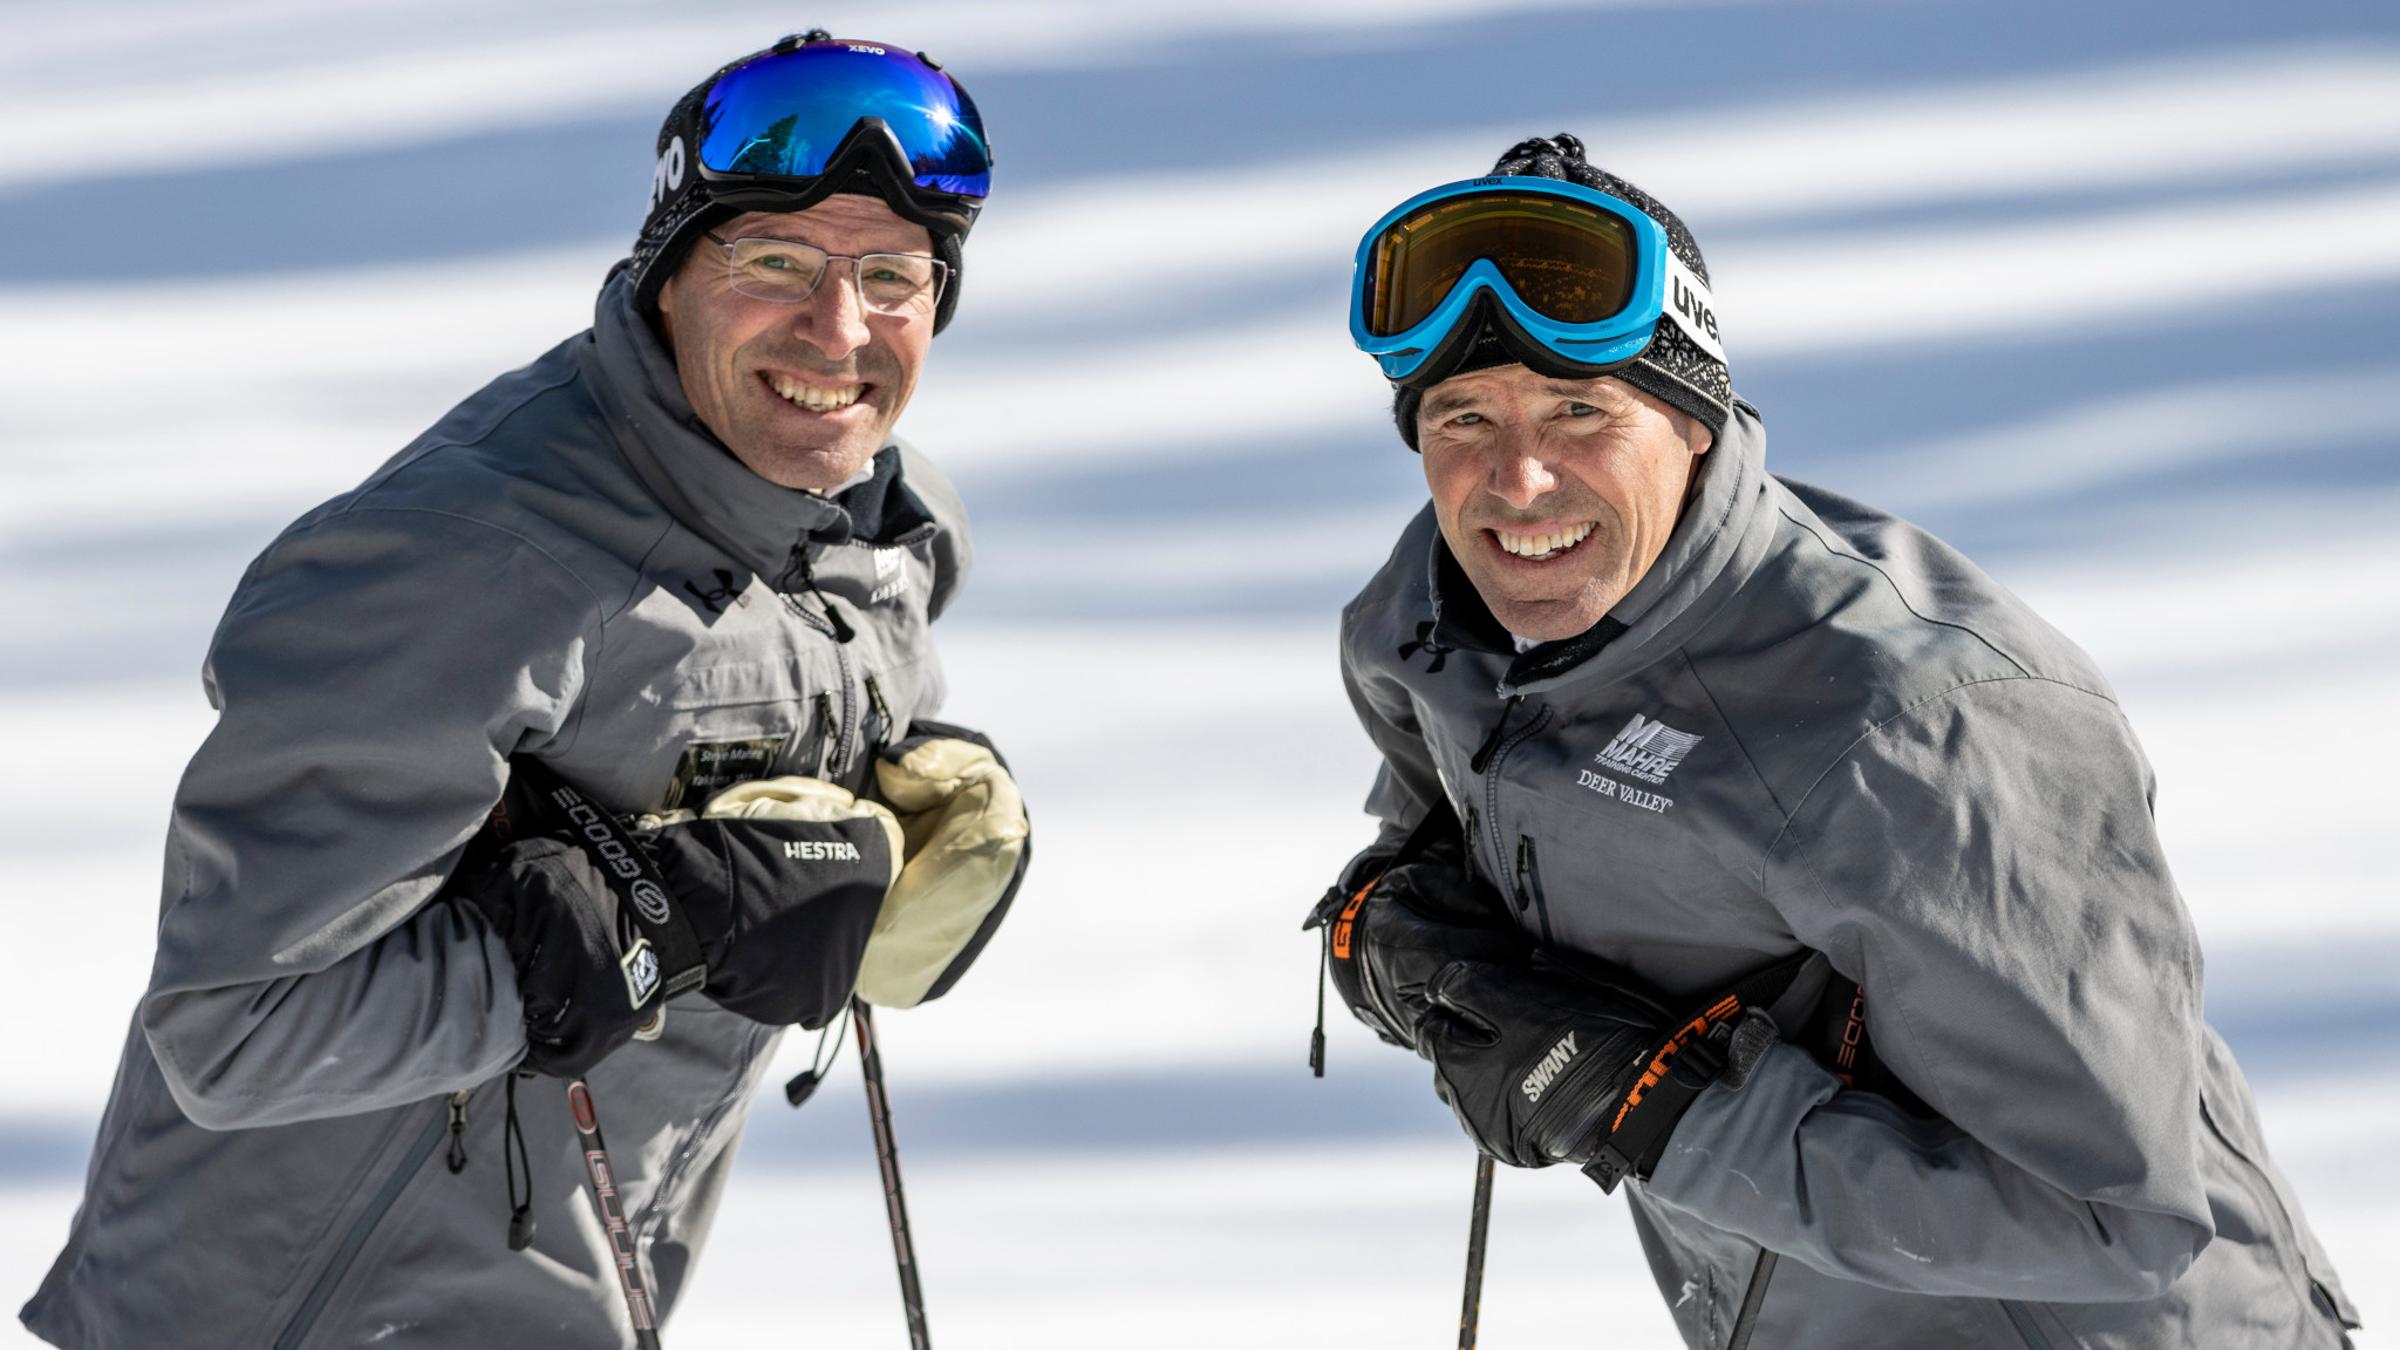 Mahre Brothers smiling on a ski run